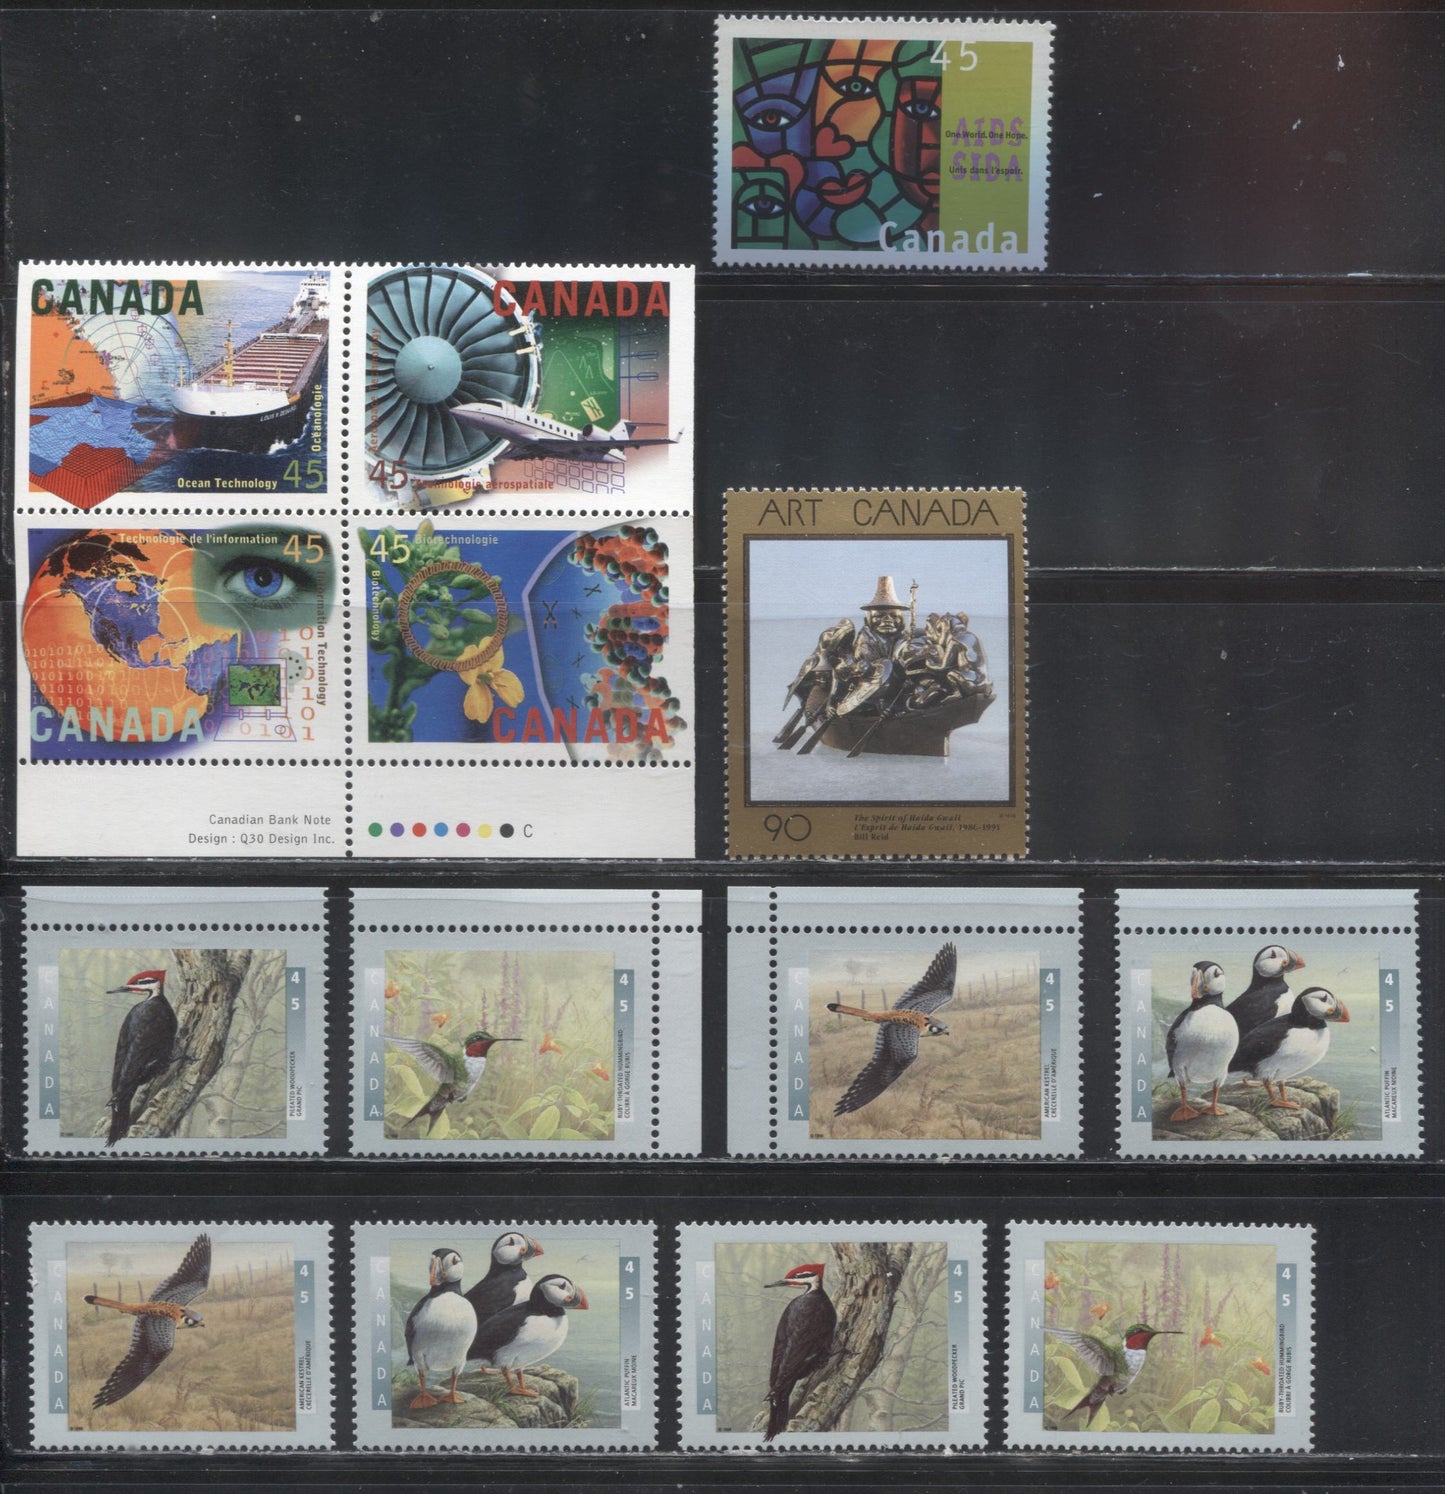 Lot 216 Canada #1591-1598, 1602-1603 45c Multicoloured Stamps 1996 Birds - Art Canada Issue, VFNH Singles and Se-Tenant Block Including MF Paper Varieties